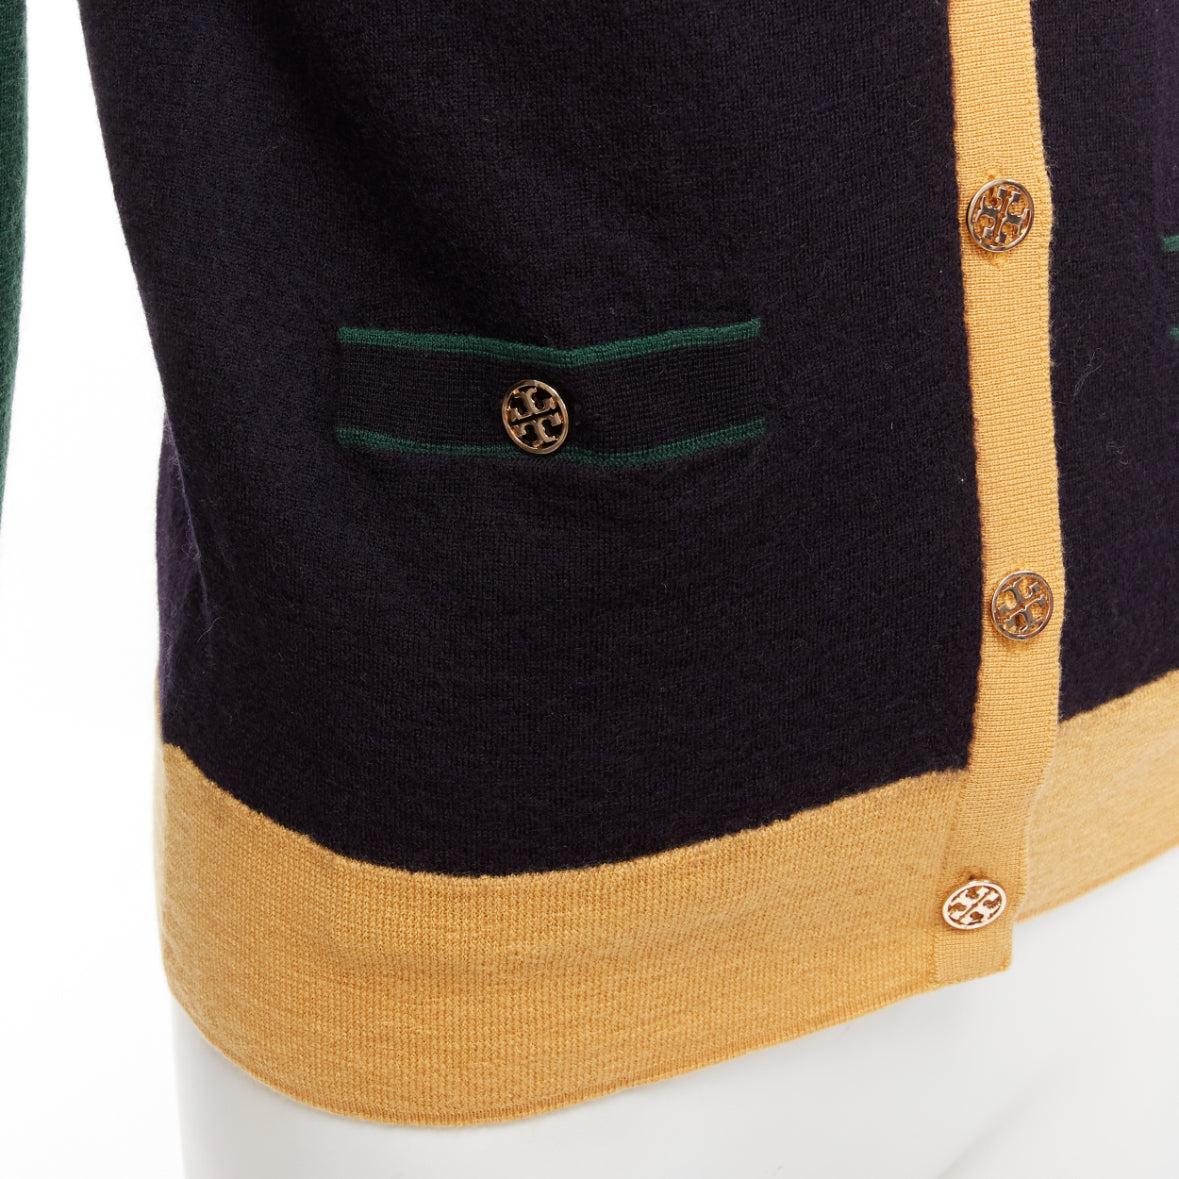 TORY BURCH 100% merino wool colorblocked logo button cardigan sweater M
Reference: KYCG/A00016
Brand: Tory Burch
Material: Merino Wool
Color: Black, Green
Pattern: Solid
Closure: Button
Extra Details: Logo buttons.
Made in: